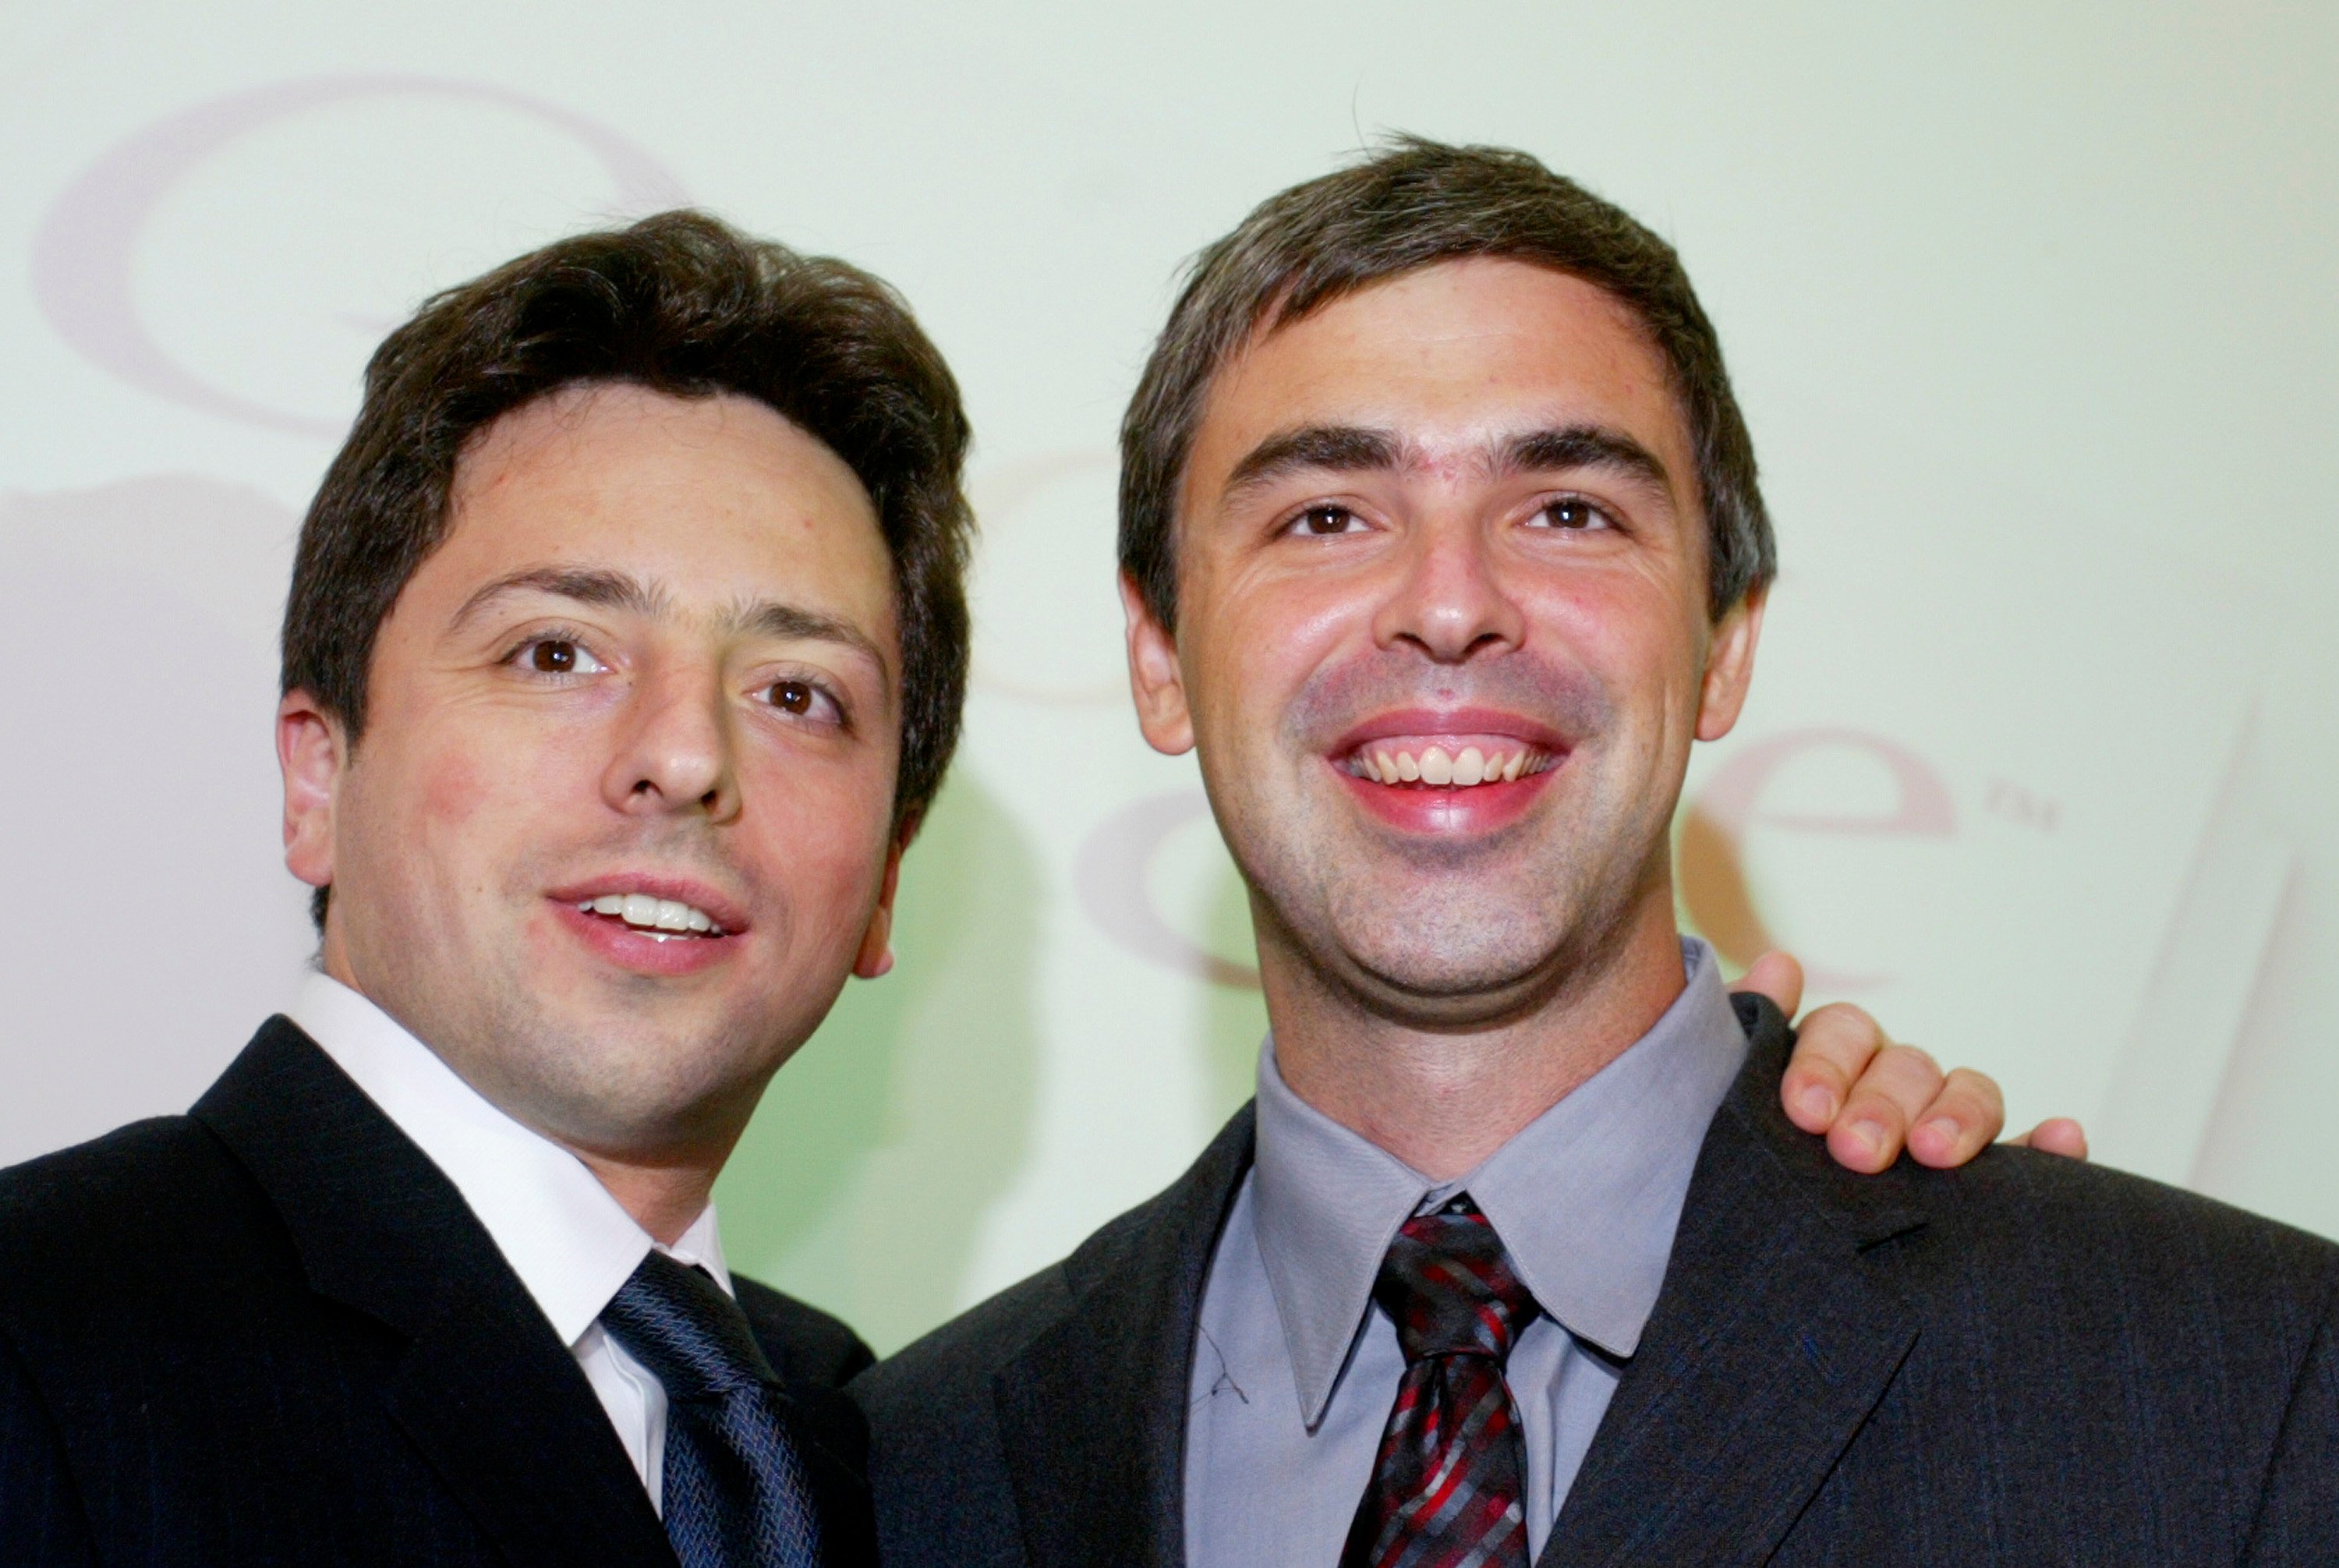 Google founders Sergey Brin (L) and Larry Page (R) smile prior to a news conference during the opening of the Frankfurt bookfair on October 7, 2004 in Frankfurt, Germany. (Ralph Orlowski/Getty Images)